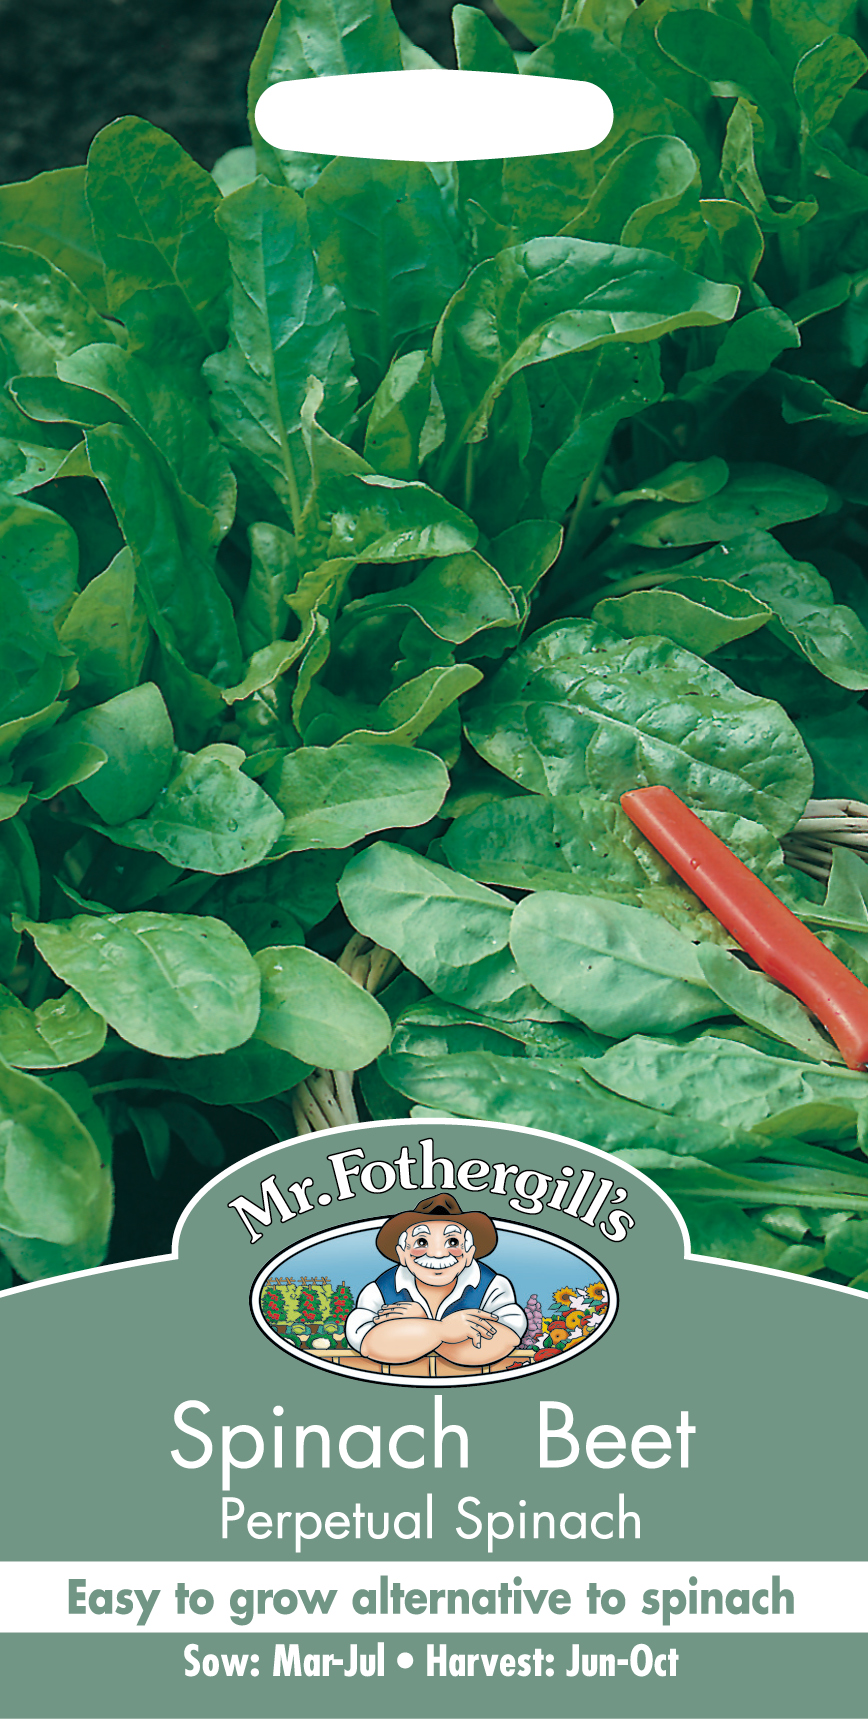 Mangold ’Perpetual Spinach’